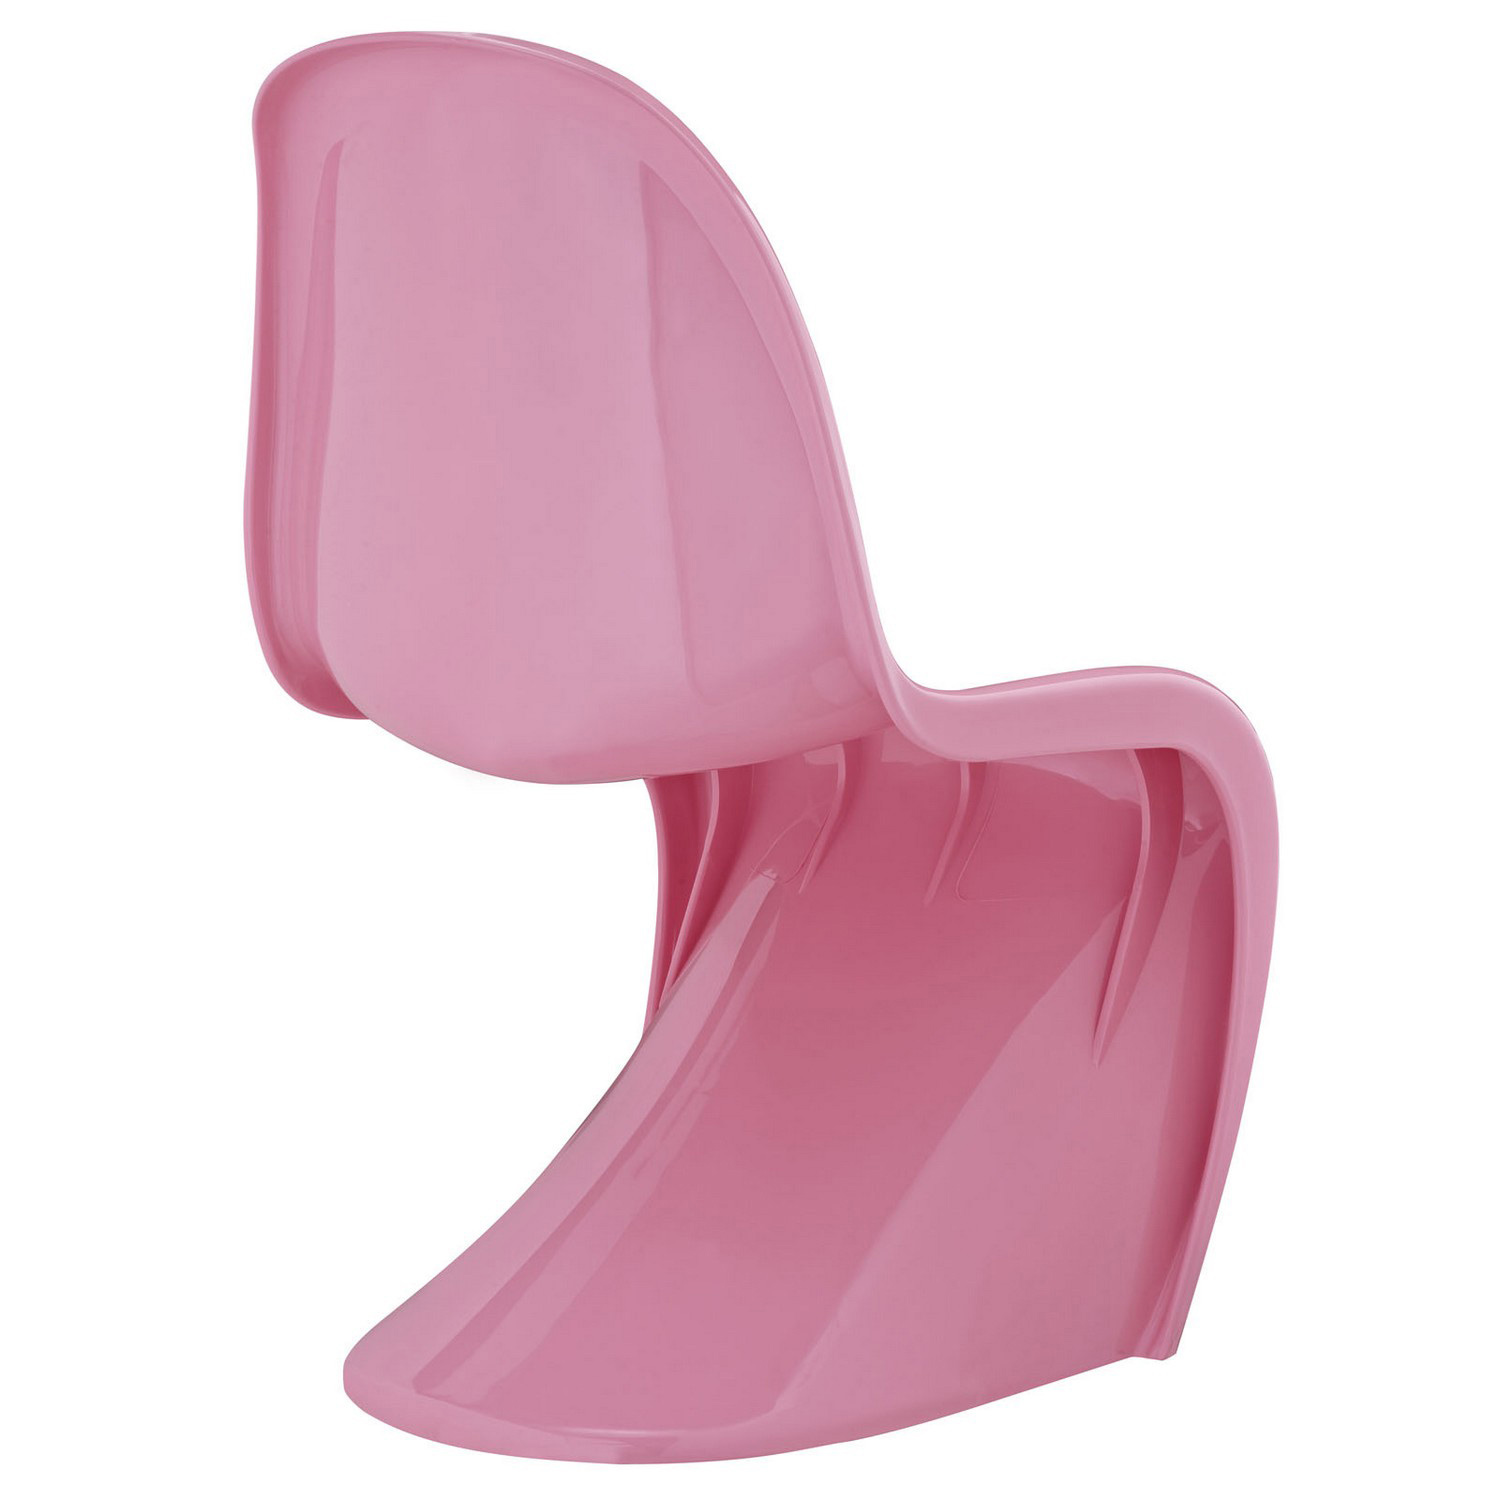 Modway Slither Dining Side Chair Set of 4 - Pink